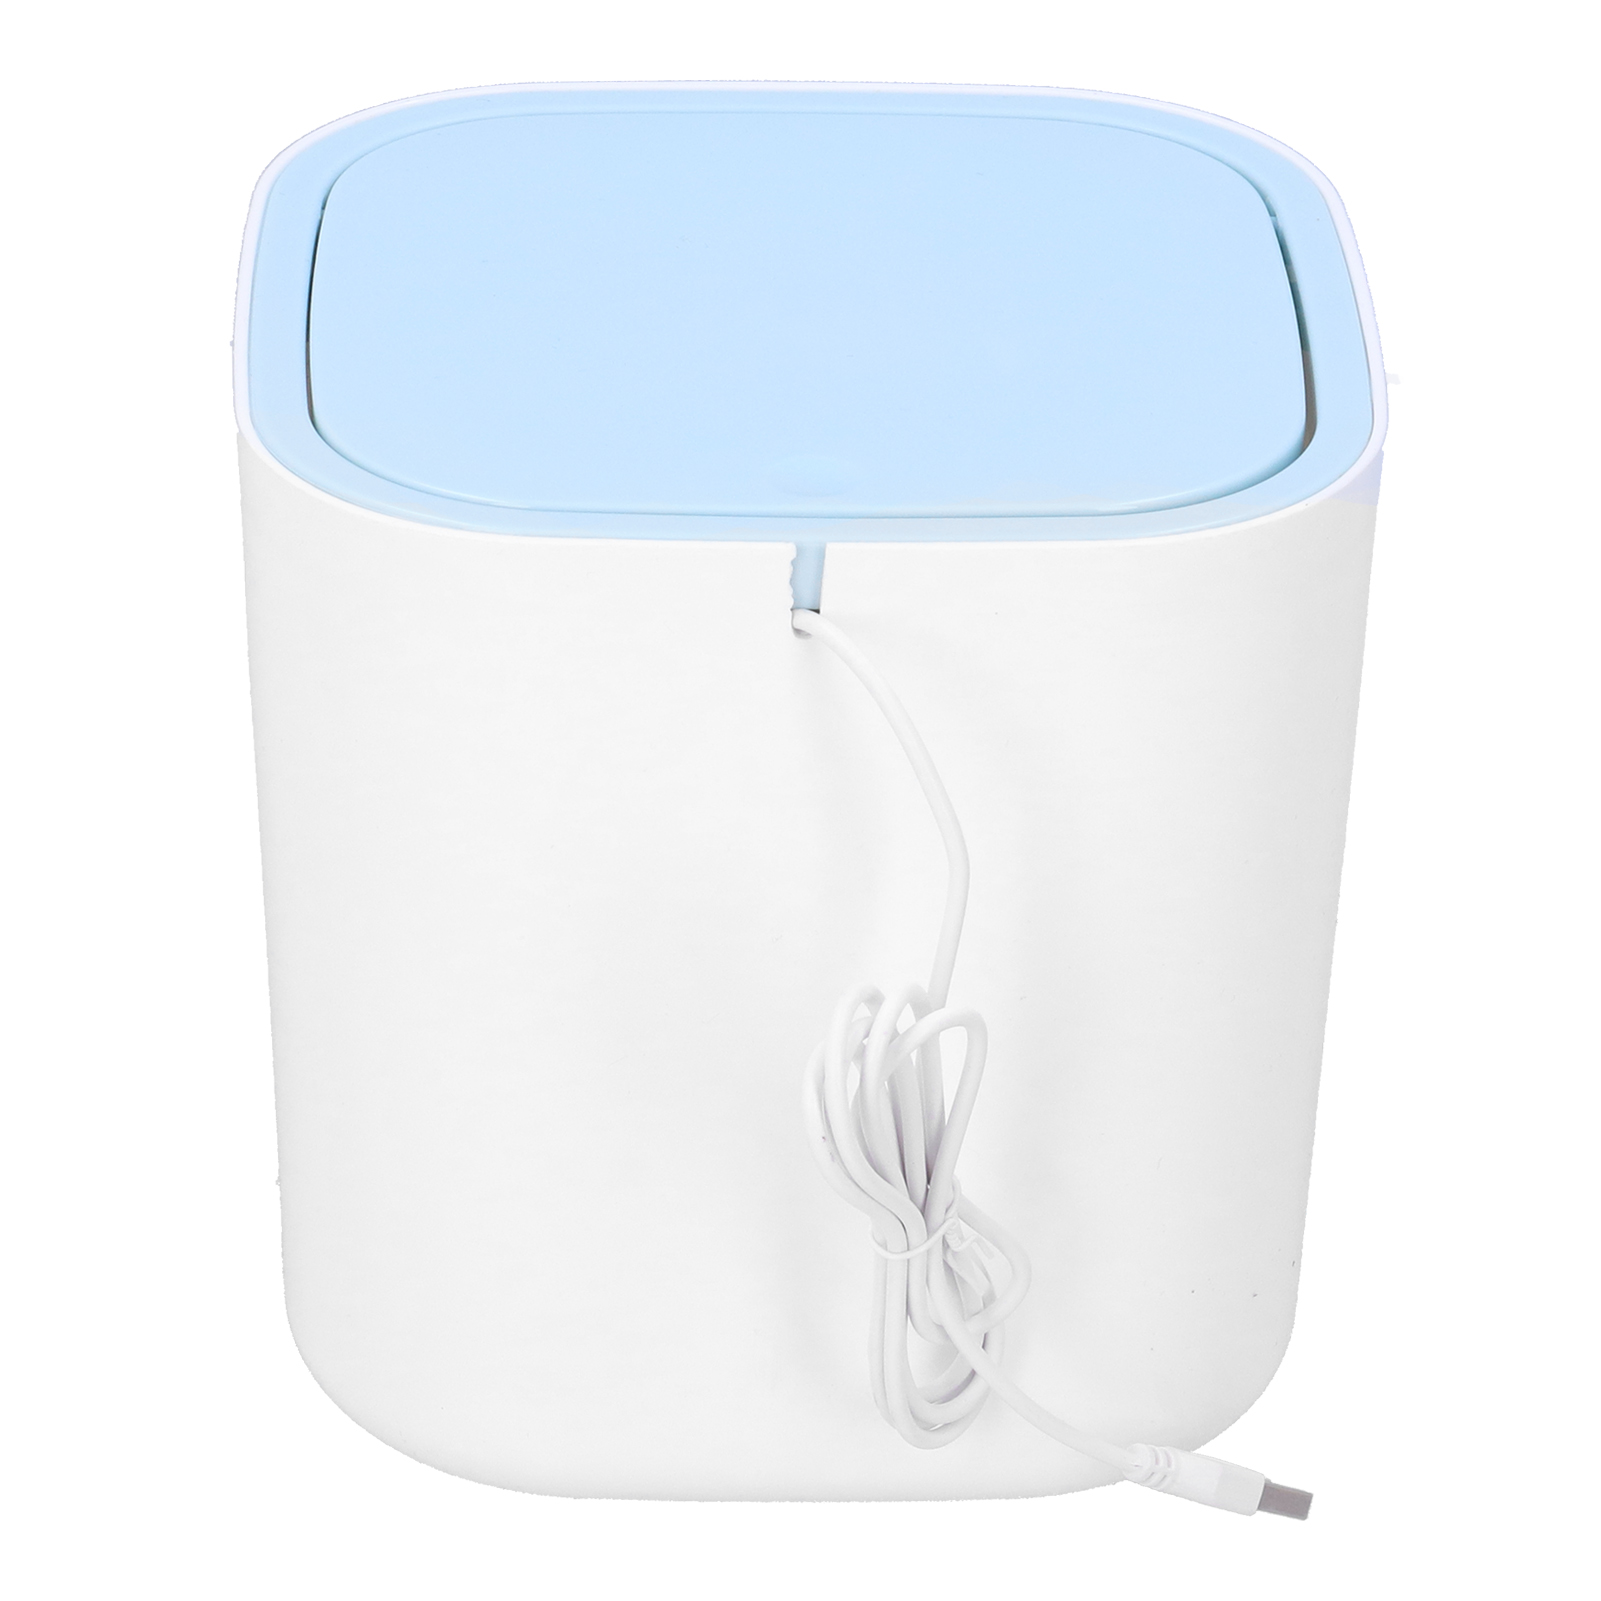 Small Washing Machine, Mini USB Powered Washing Machine Convinient For Wash  Underwearq For Home For Wash Socks For Travel 